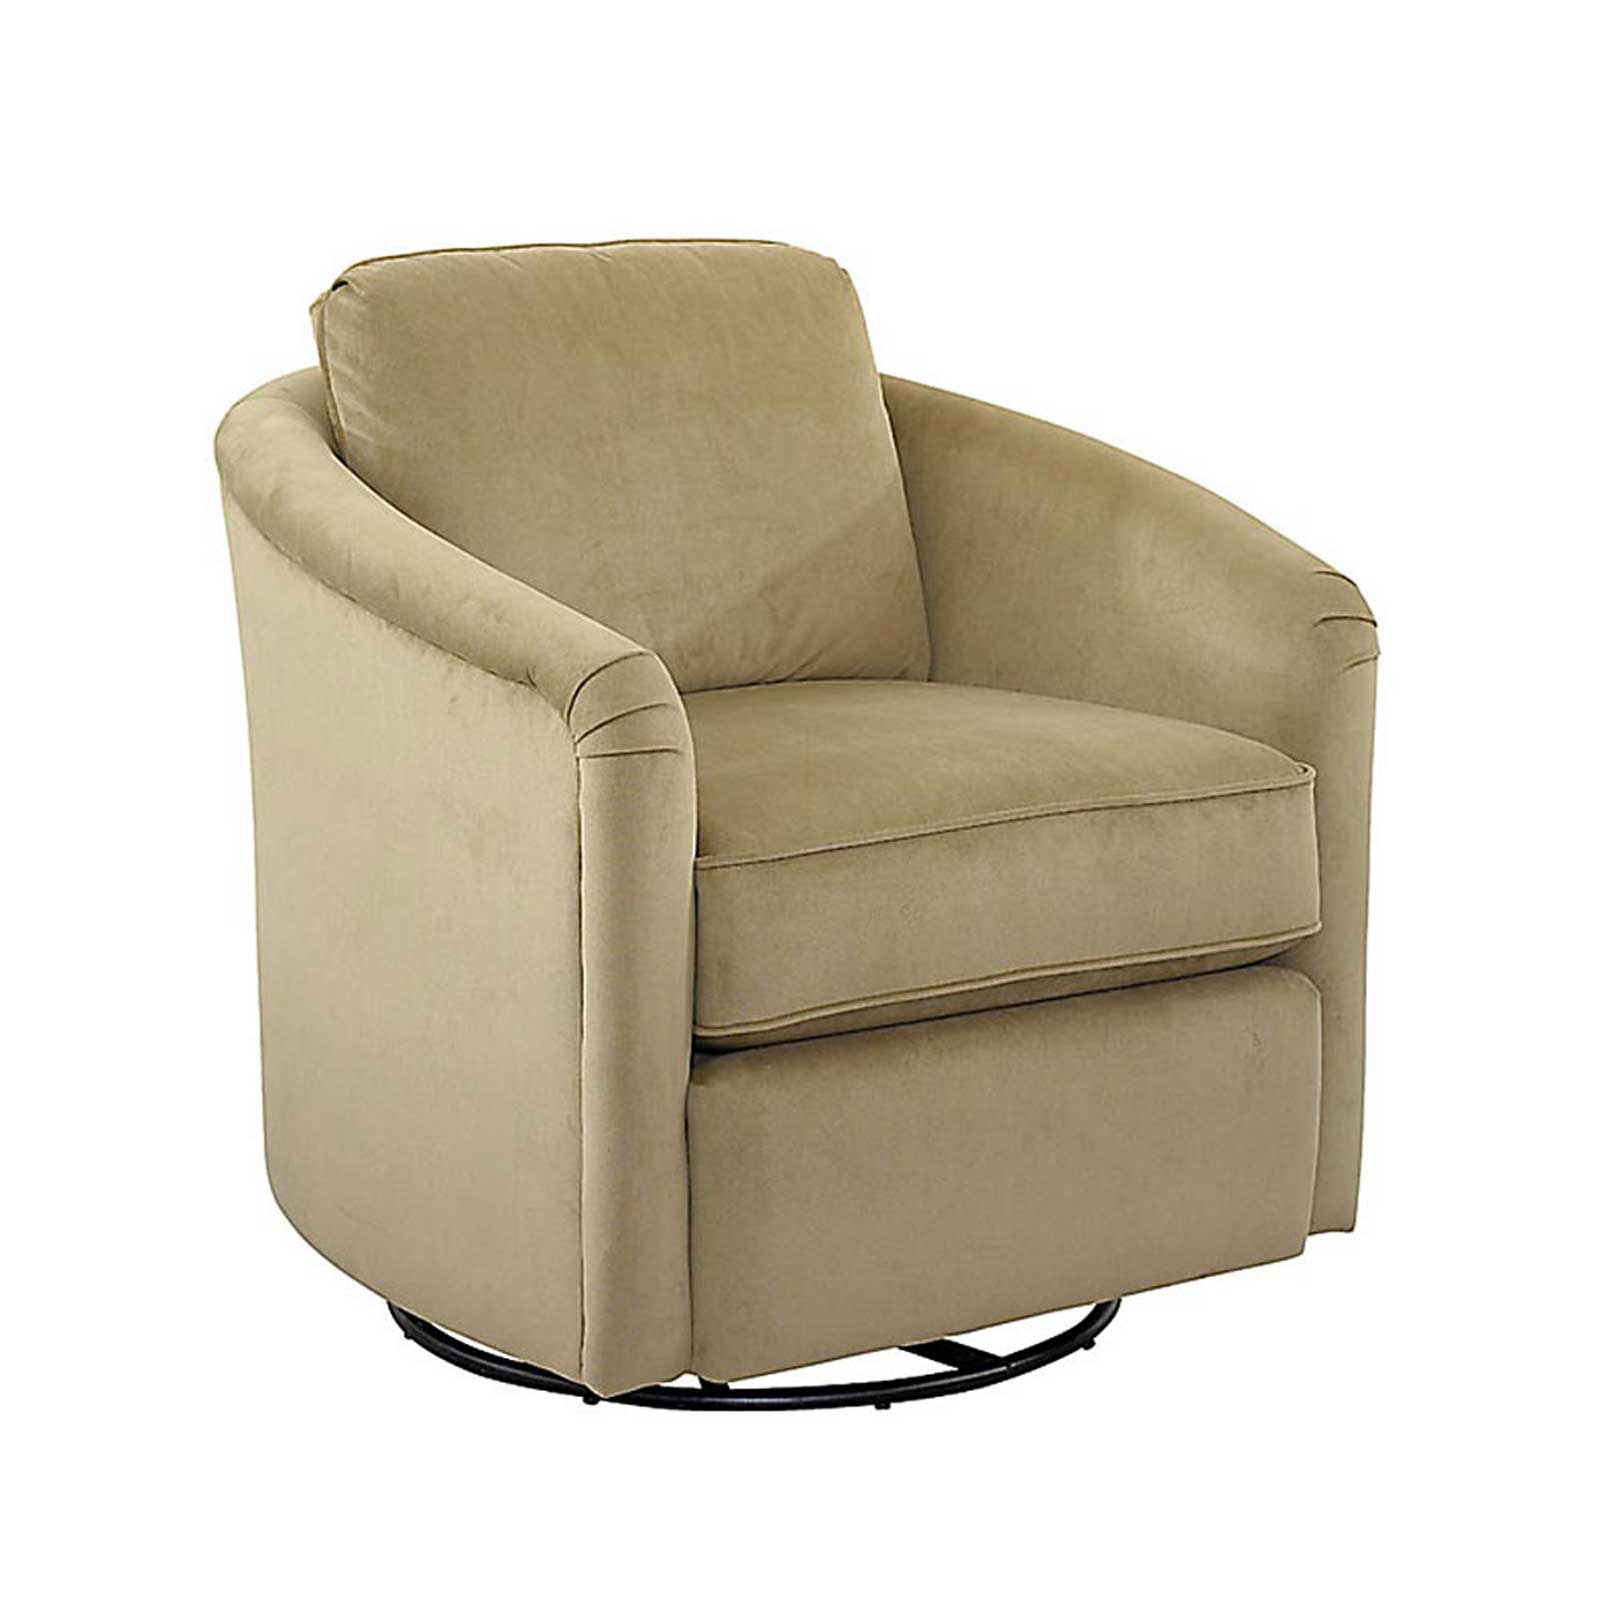 upholstered chair on Traditional Upholstered Fabric Swivel Glider Tub Chair